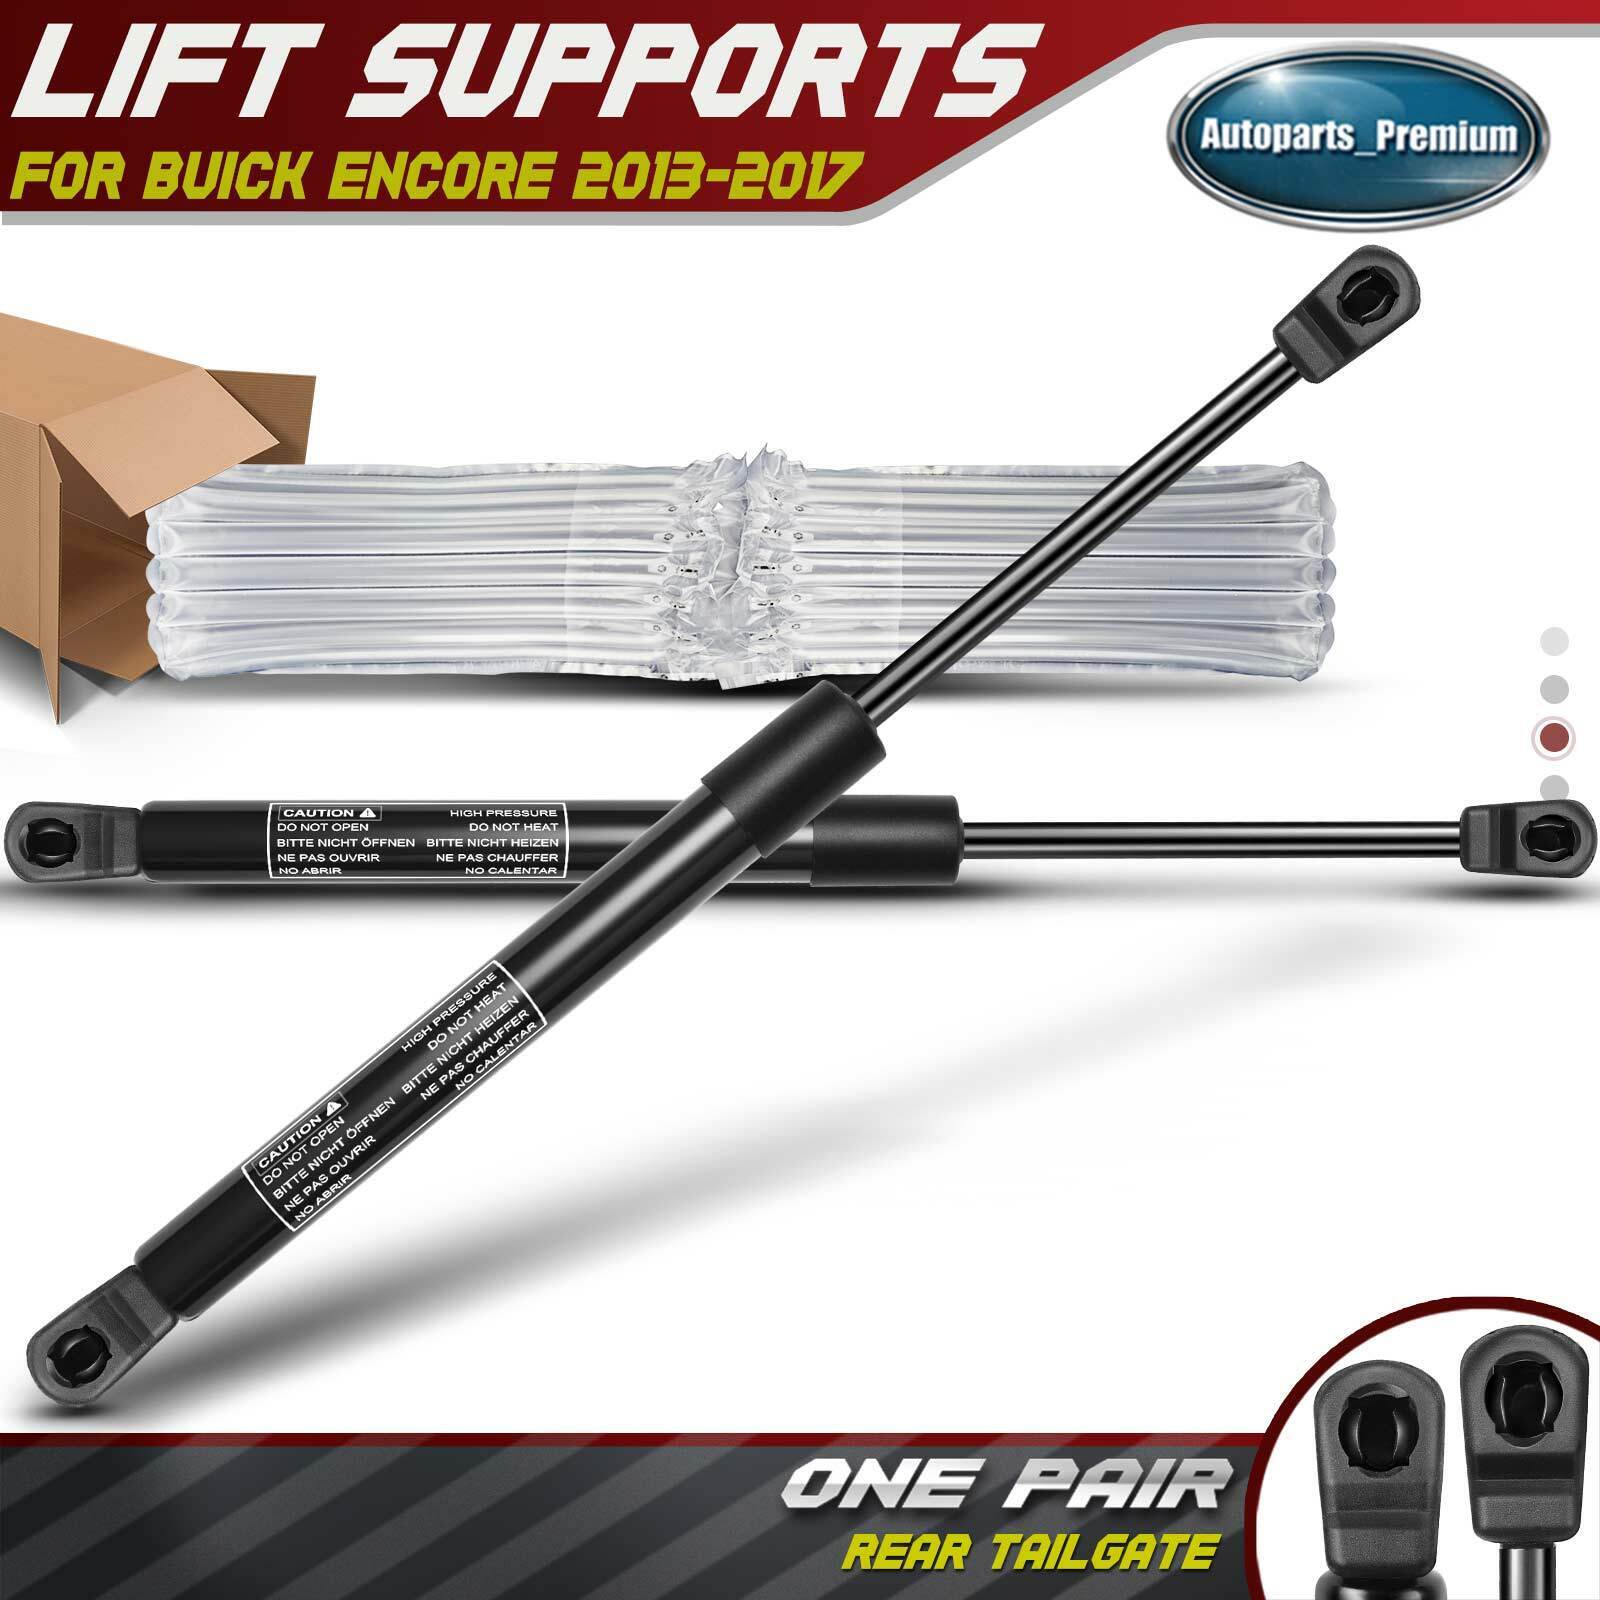 2x Rear Tailgate Hatch Lift Support Shock Struts for Nissan Quest 2004-2010 4589